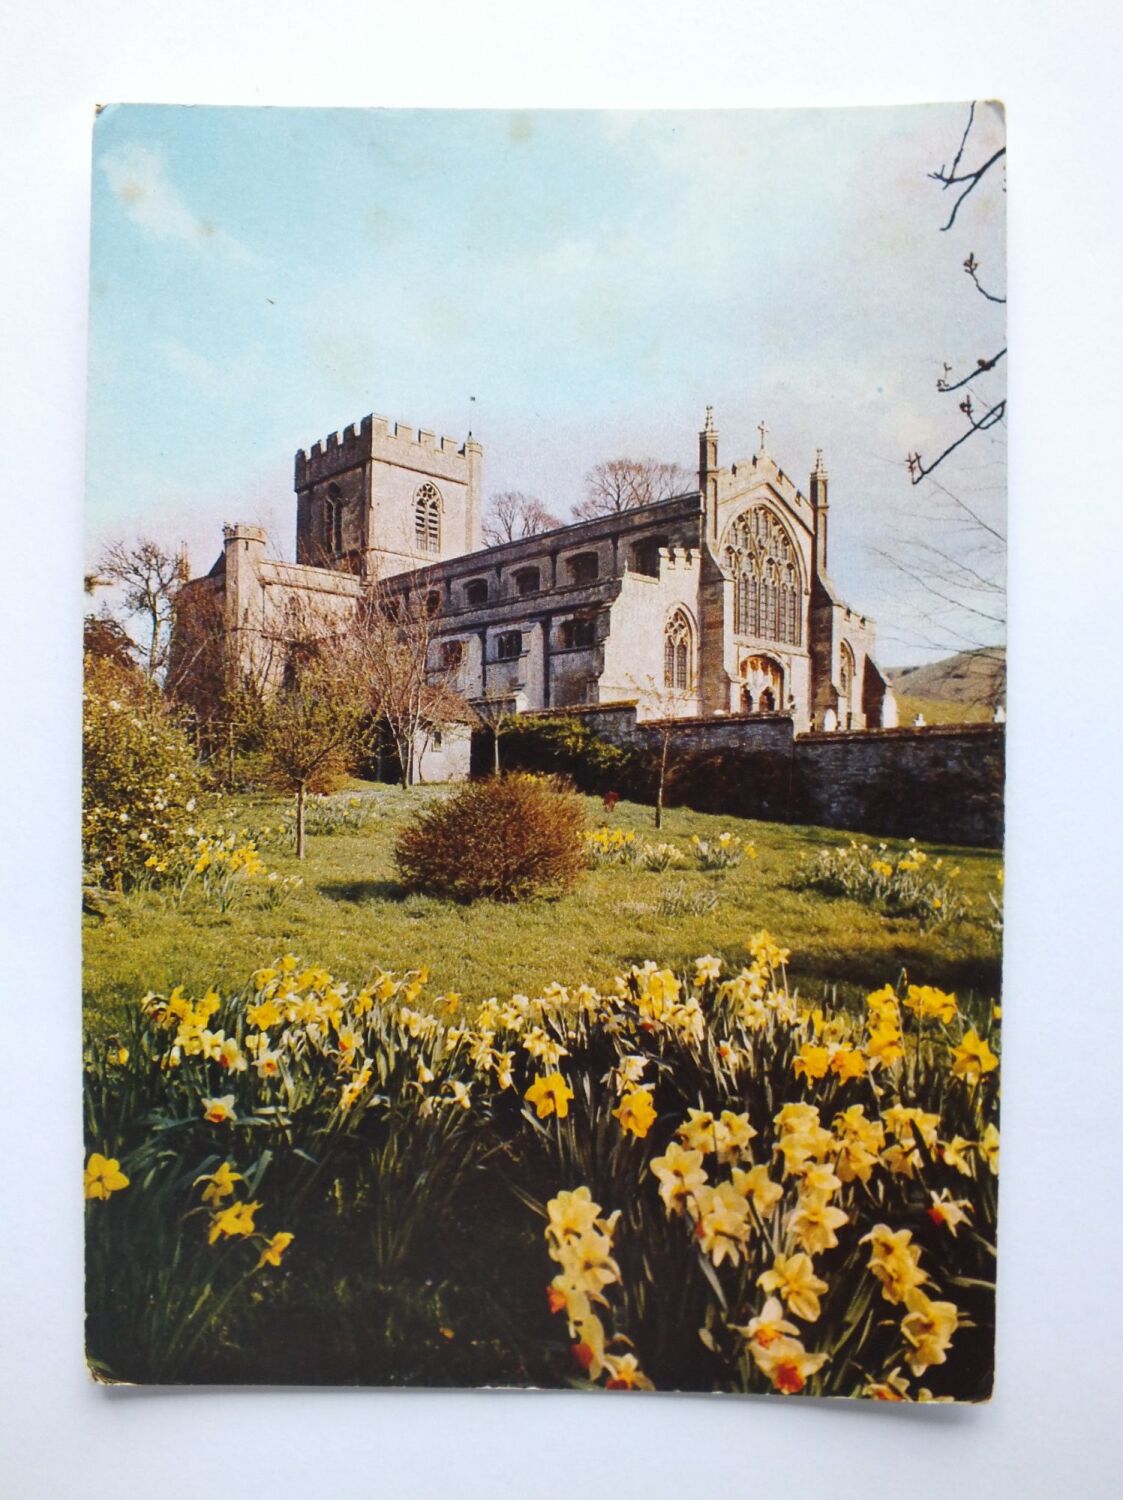 Edington Priory Church Wiltshire From The North West-Colour Photo Postcard